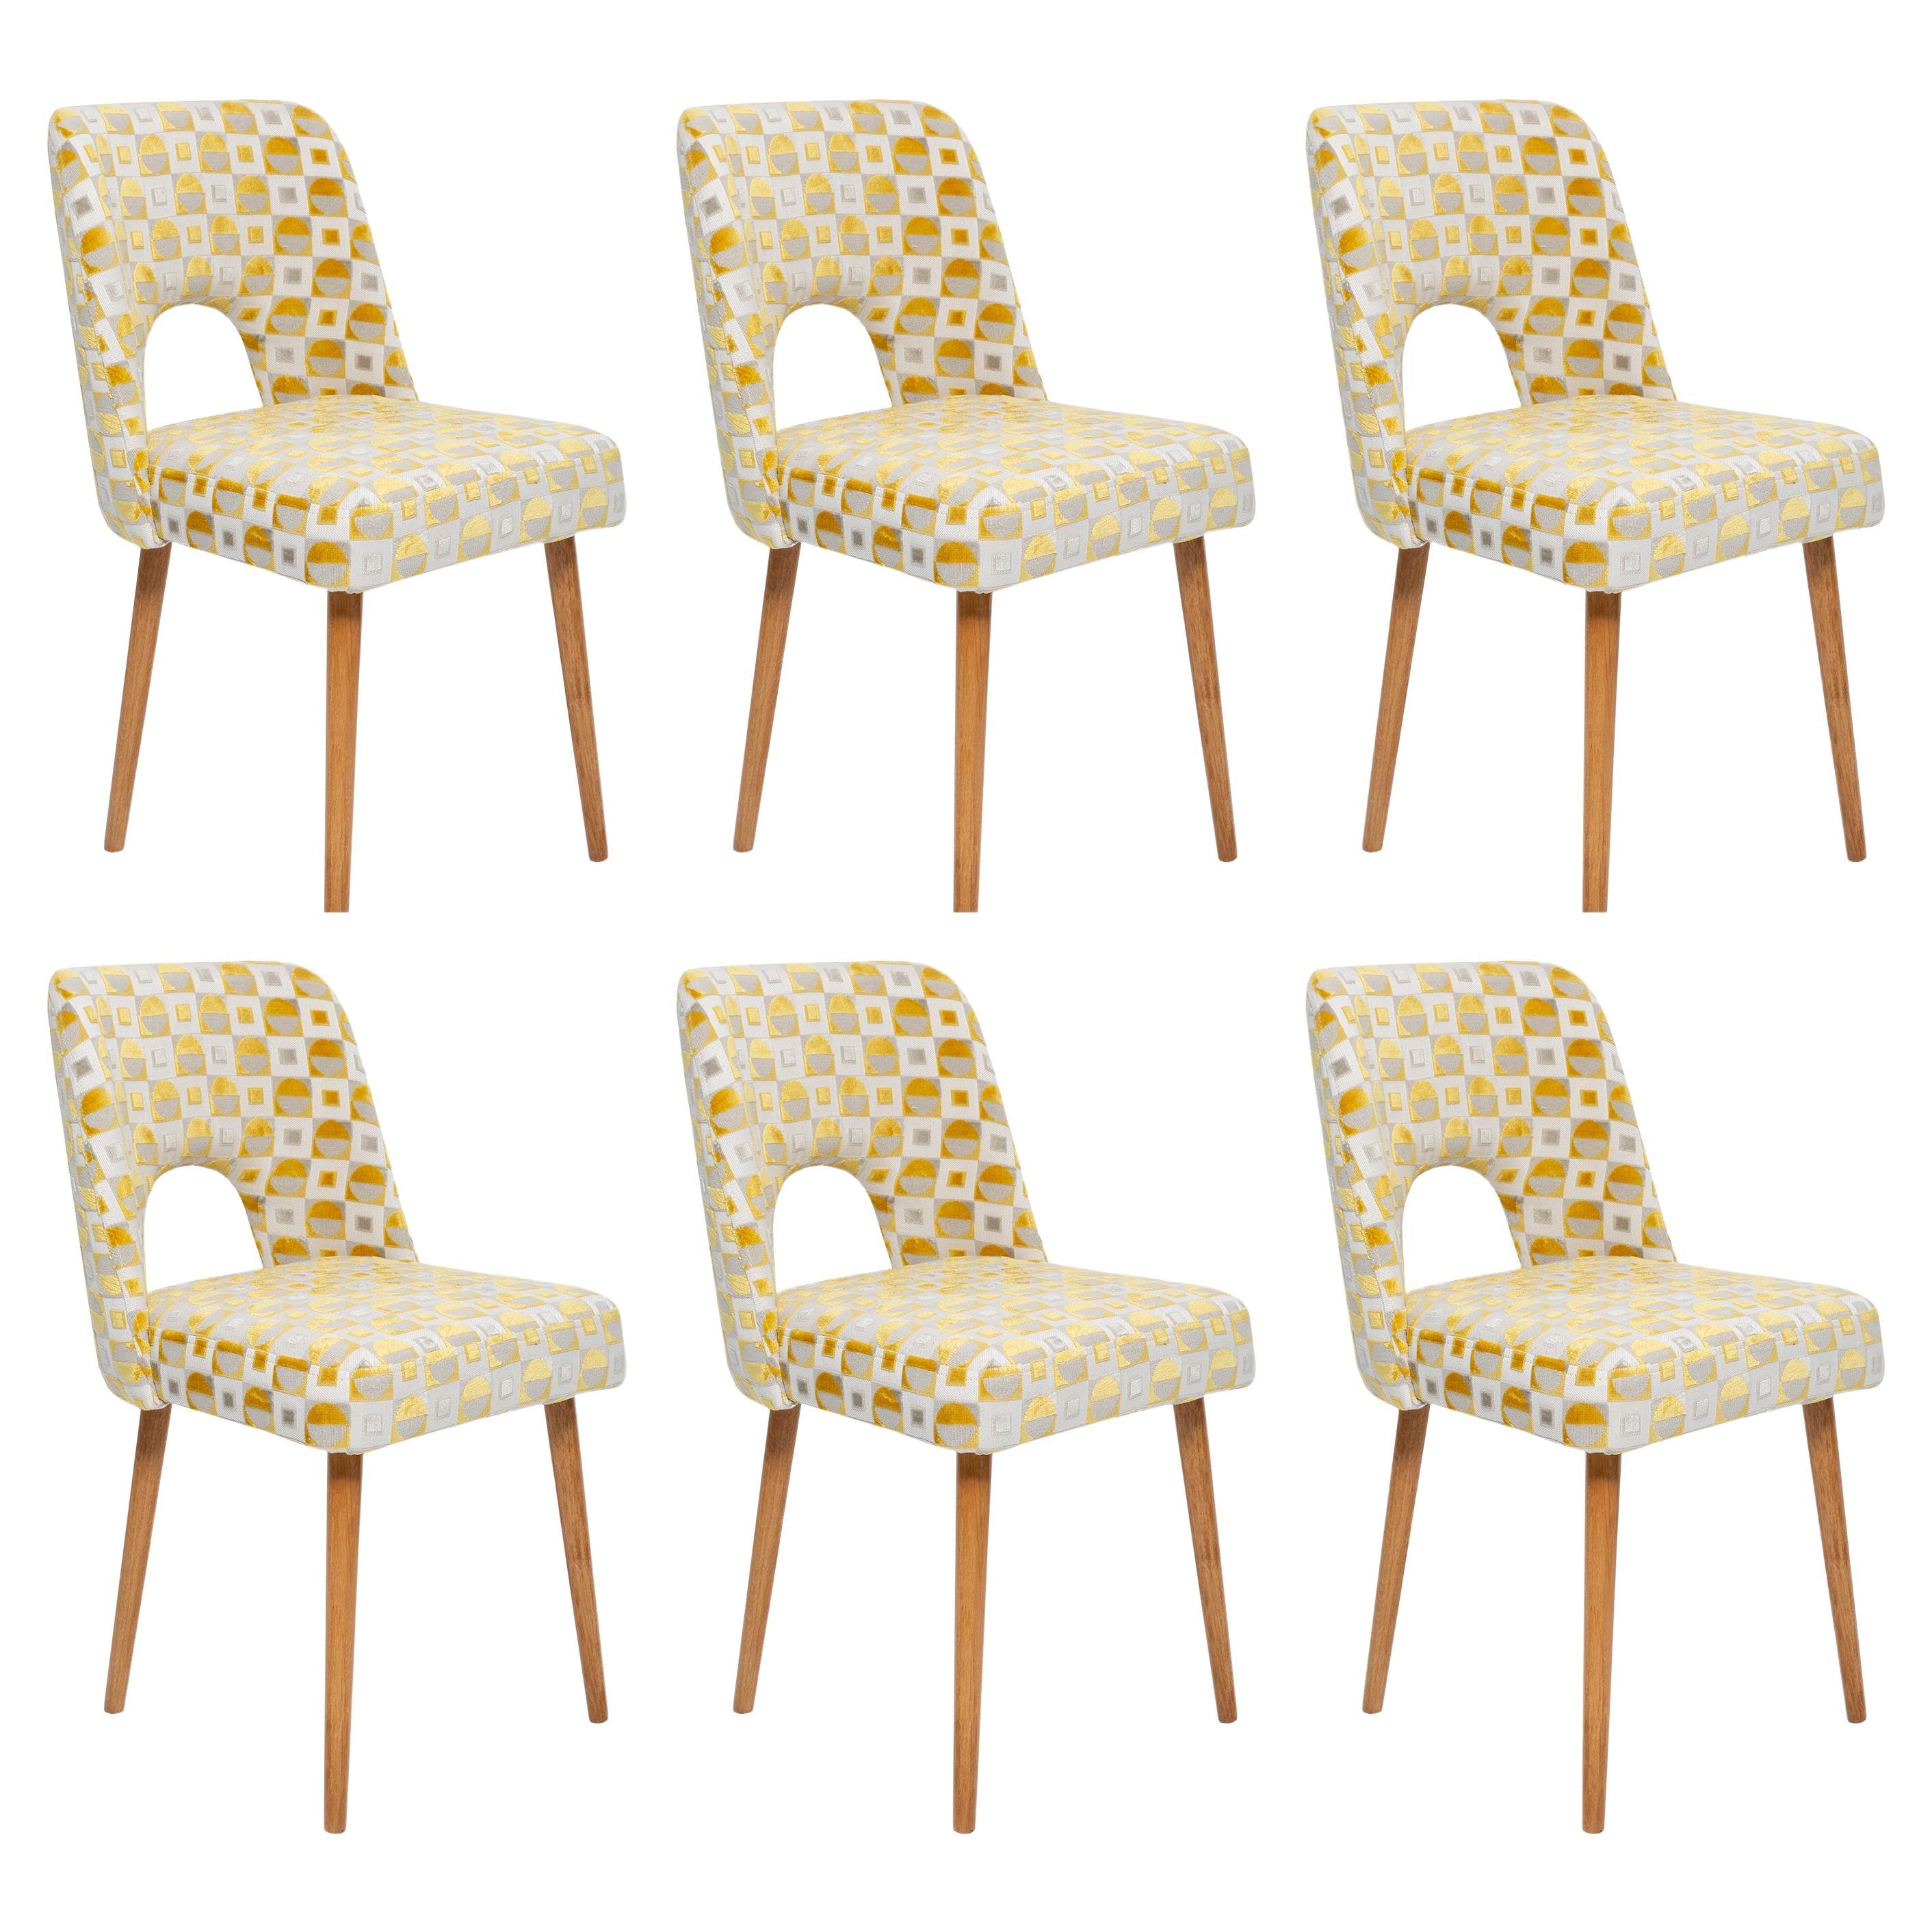 Set of Six Yellow "Shell" Chairs, Poland, 1960s